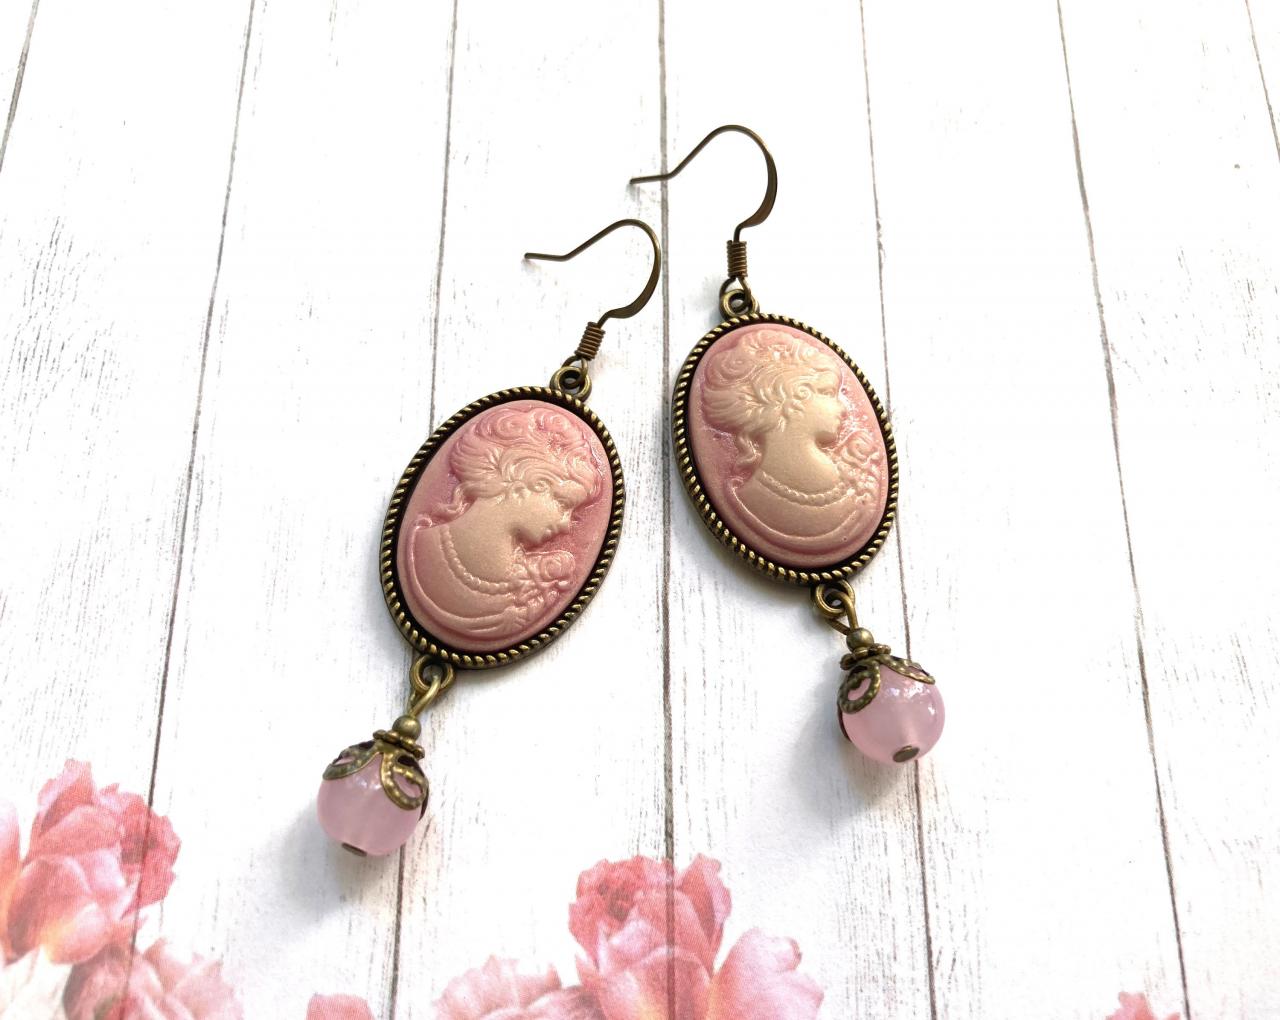 Vintage Inspired Cameo Earrings With Glass Pearls And Filigree, Selma Dreams